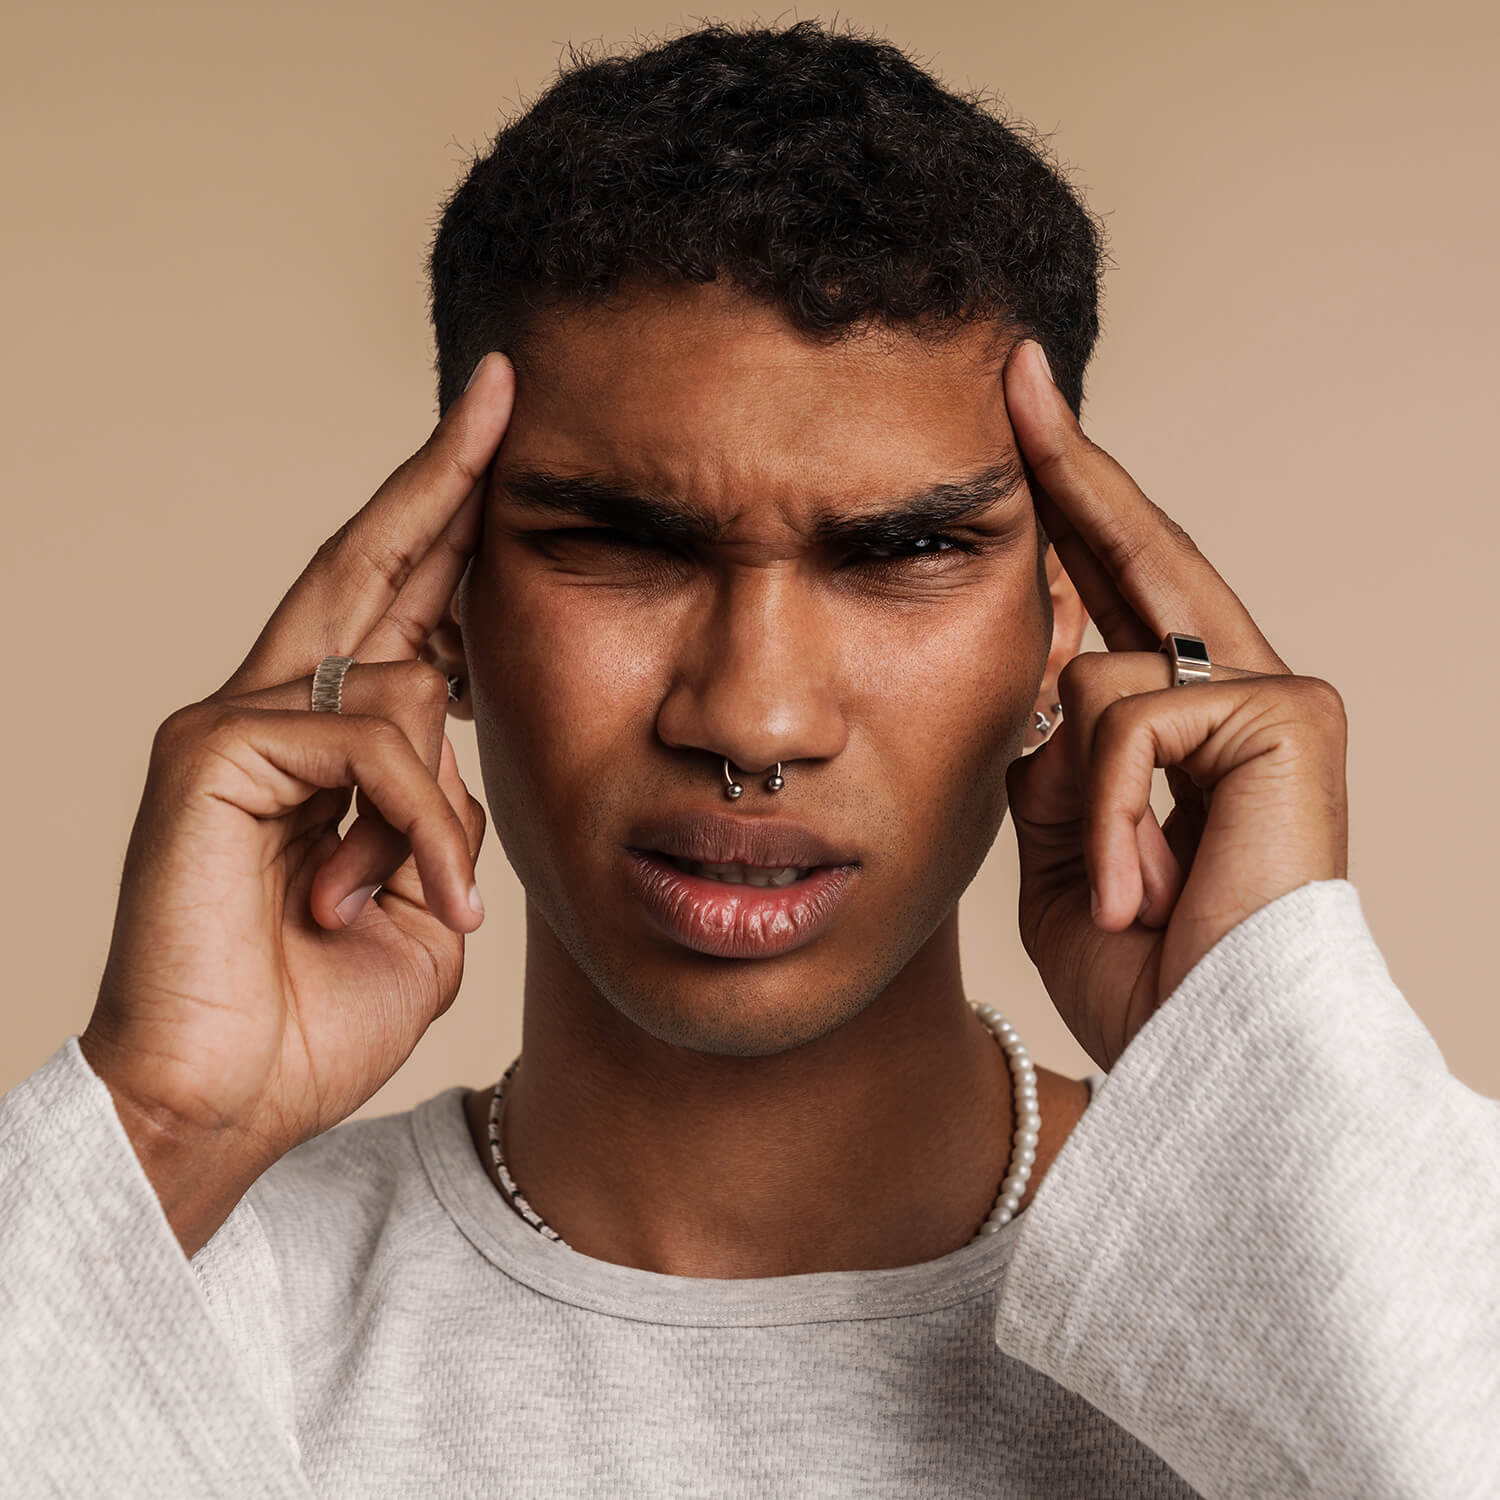 African man with septum piercing confused holding fingers to temples